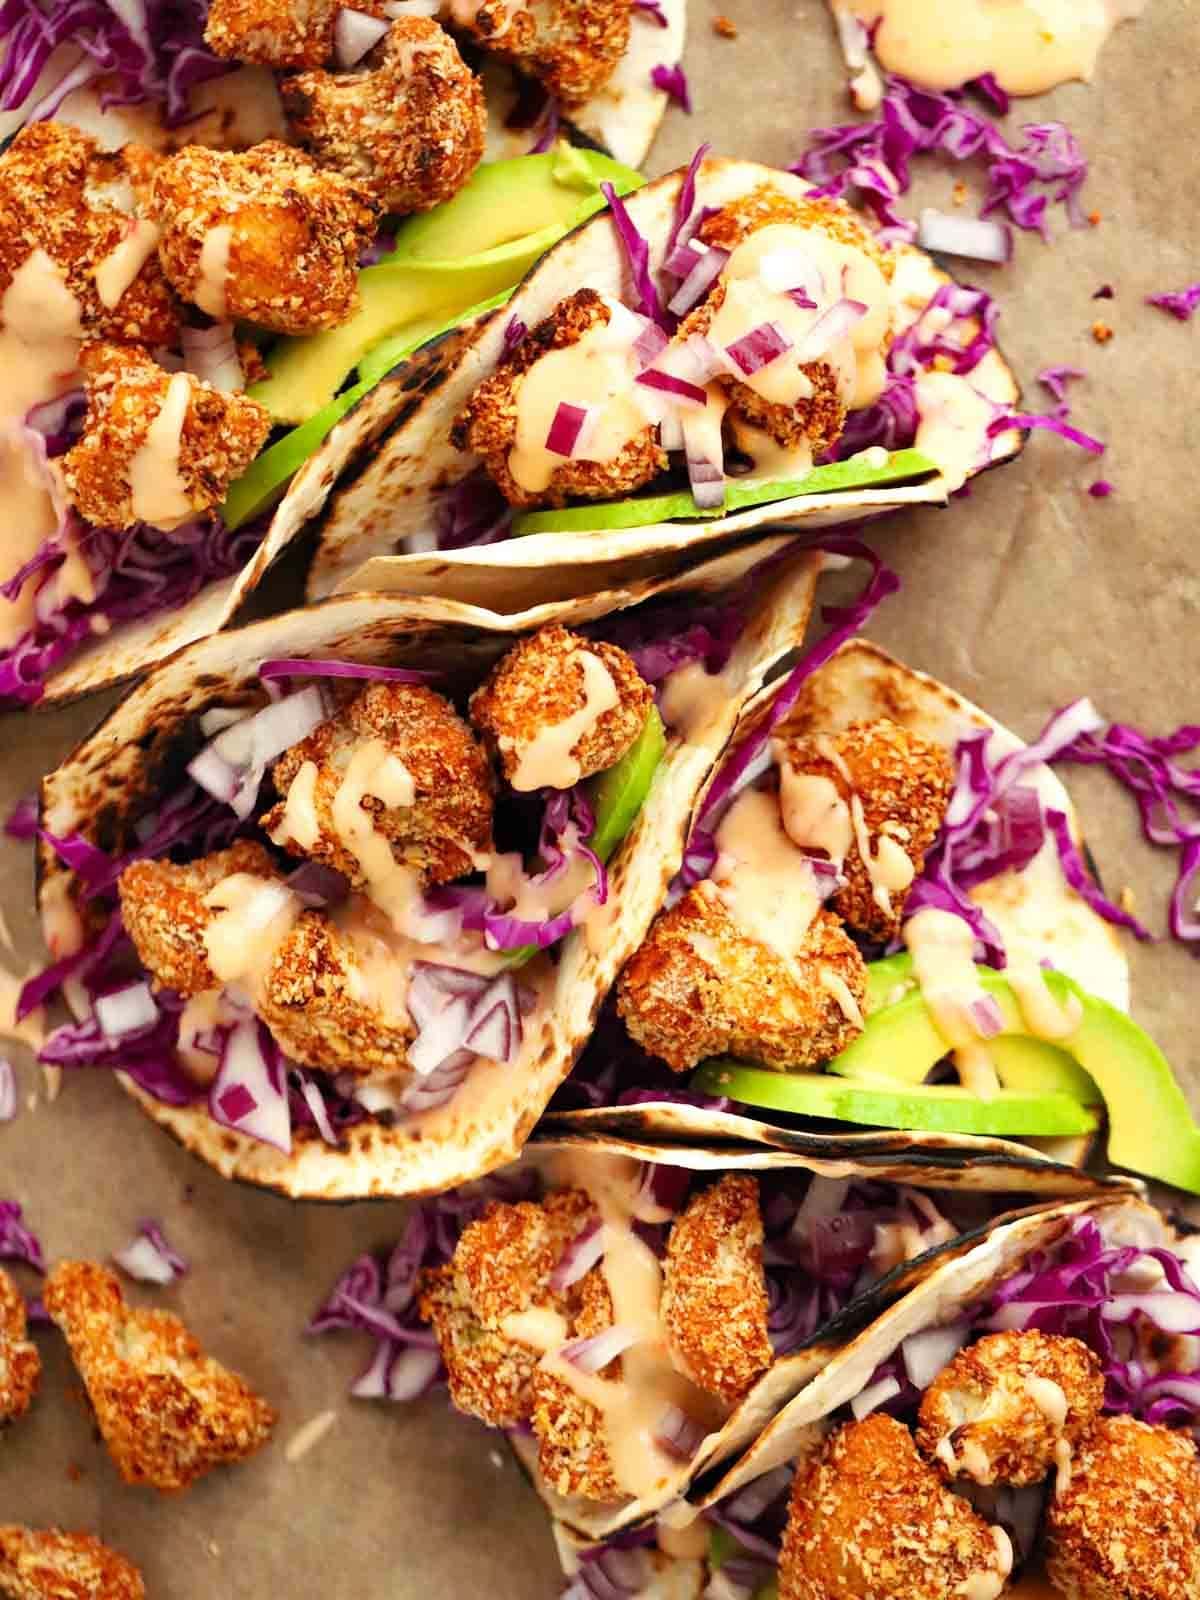 A row of Cauliflower Tacos stuff with salad, crispy cauliflower and topped with a sweet chilli mayo.